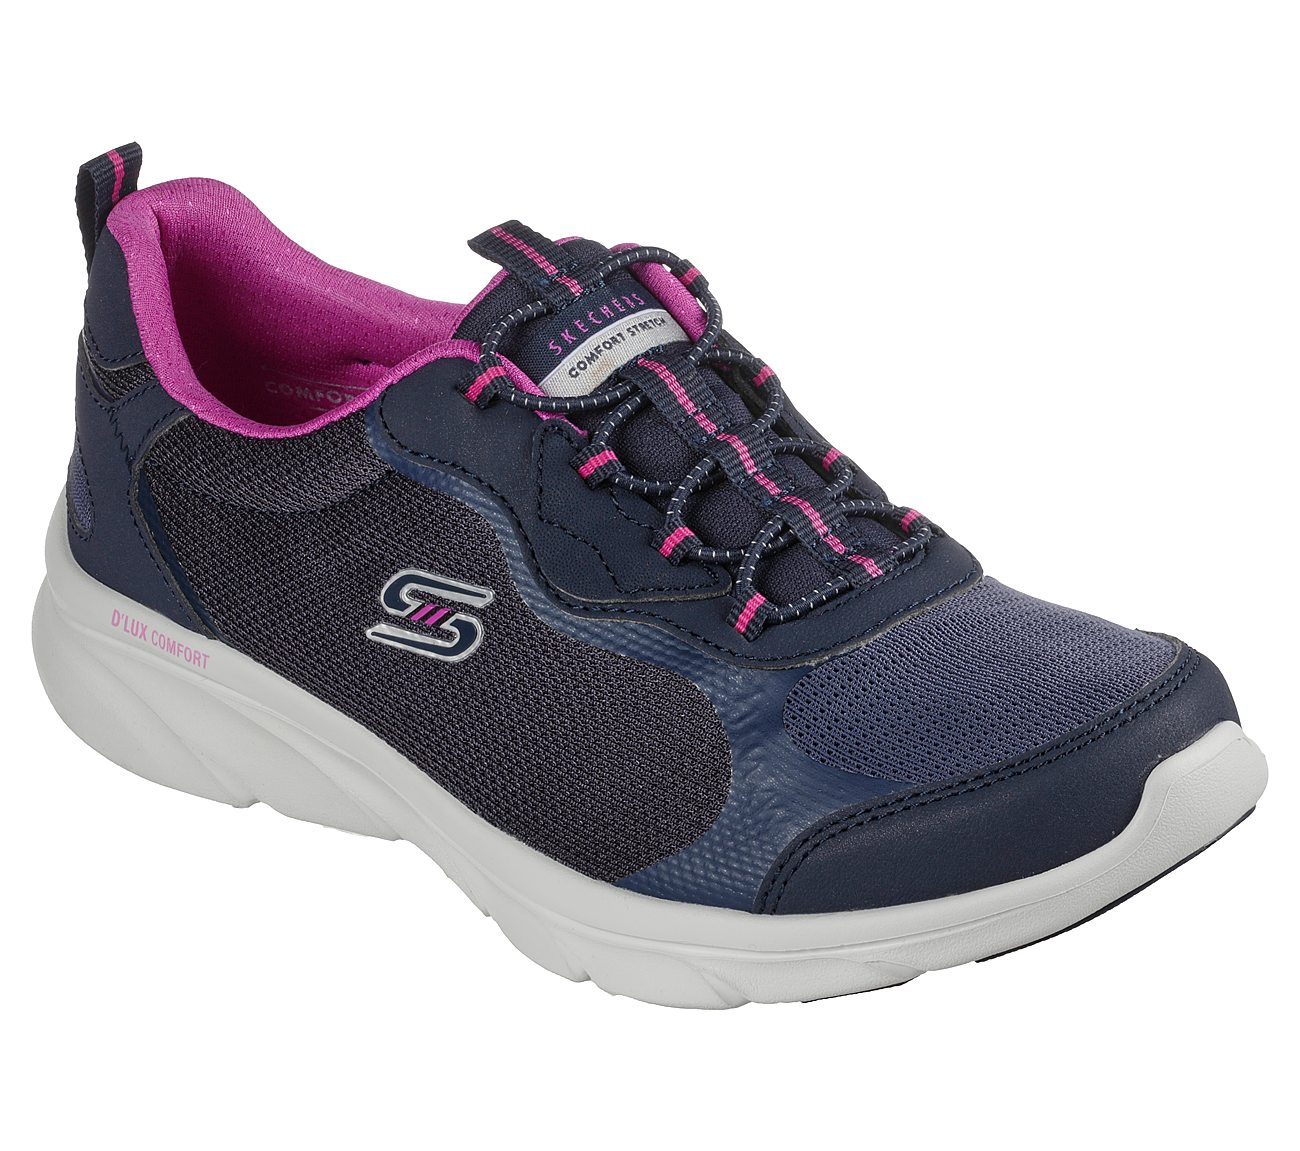 D'LUX COMFORT - BLISS GALORE, NAVY/PURPLE Footwear Lateral View